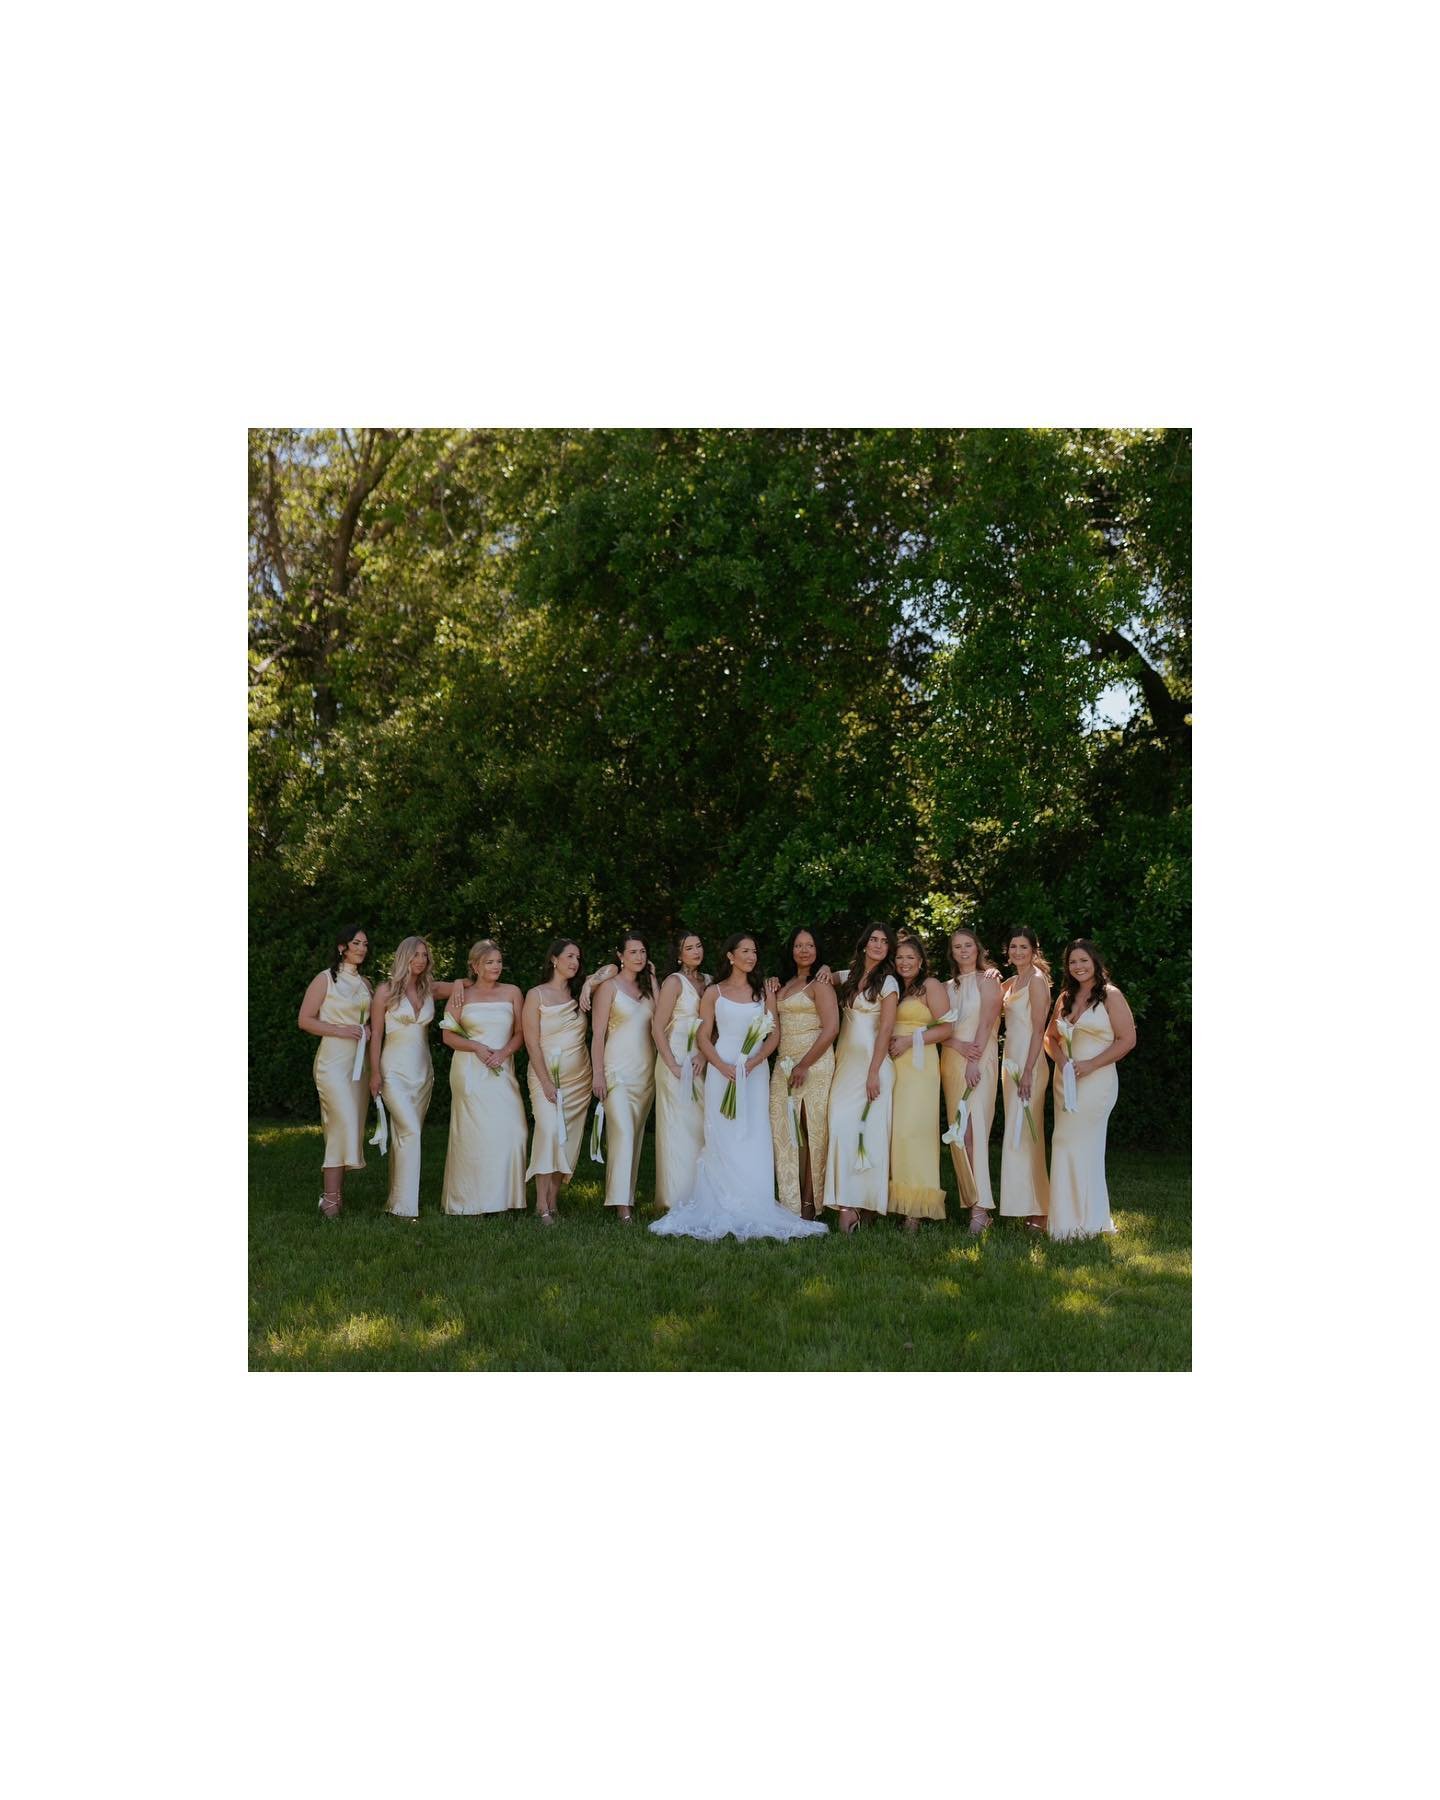 BRIDAL PARTY✨ The MVPs of wedding days. The ones steaming dresses, running around to find missing jewelry, locating your Aunt Sally who wandered away&mdash; we see you, we love you, we honor you👏🏼 

Who was your wedding day MVP? 

I&rsquo;ll go fir